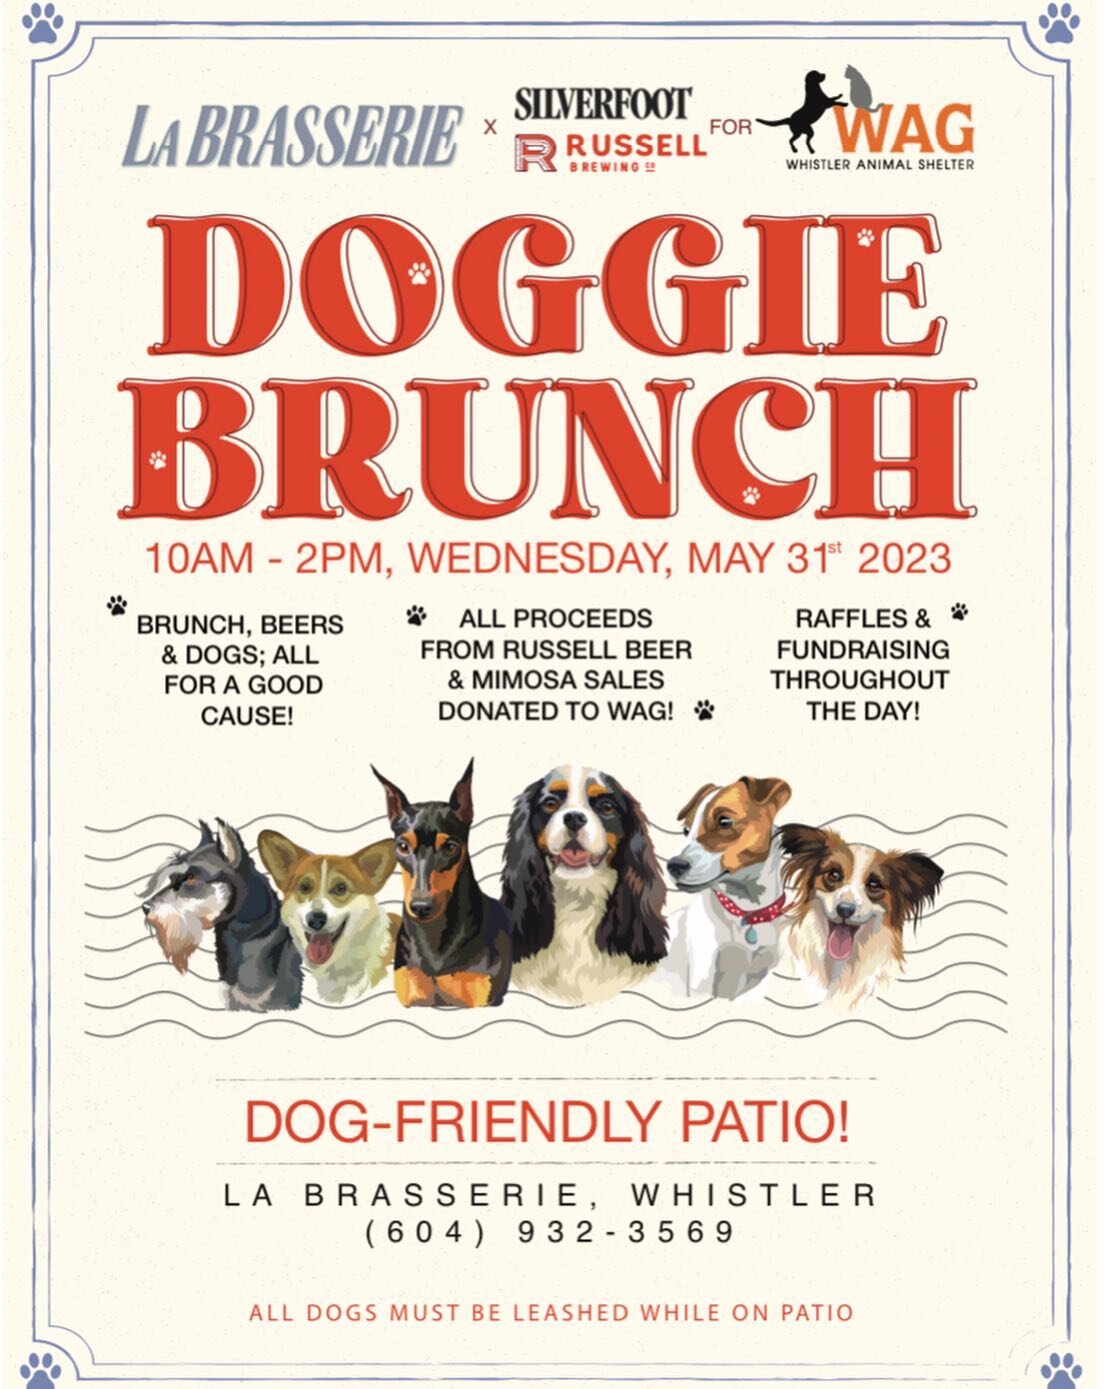 🐾DOGGIE BRUNCH WAG FUNDRAISER🐾

Wednesday, May 31st, we will be holding a brunch on our new dog-friendly patio to support our furry friends at @whistlerwag! 

All proceeds from mimosa and @russell_beer sale will be donated, with more fundraiser &am